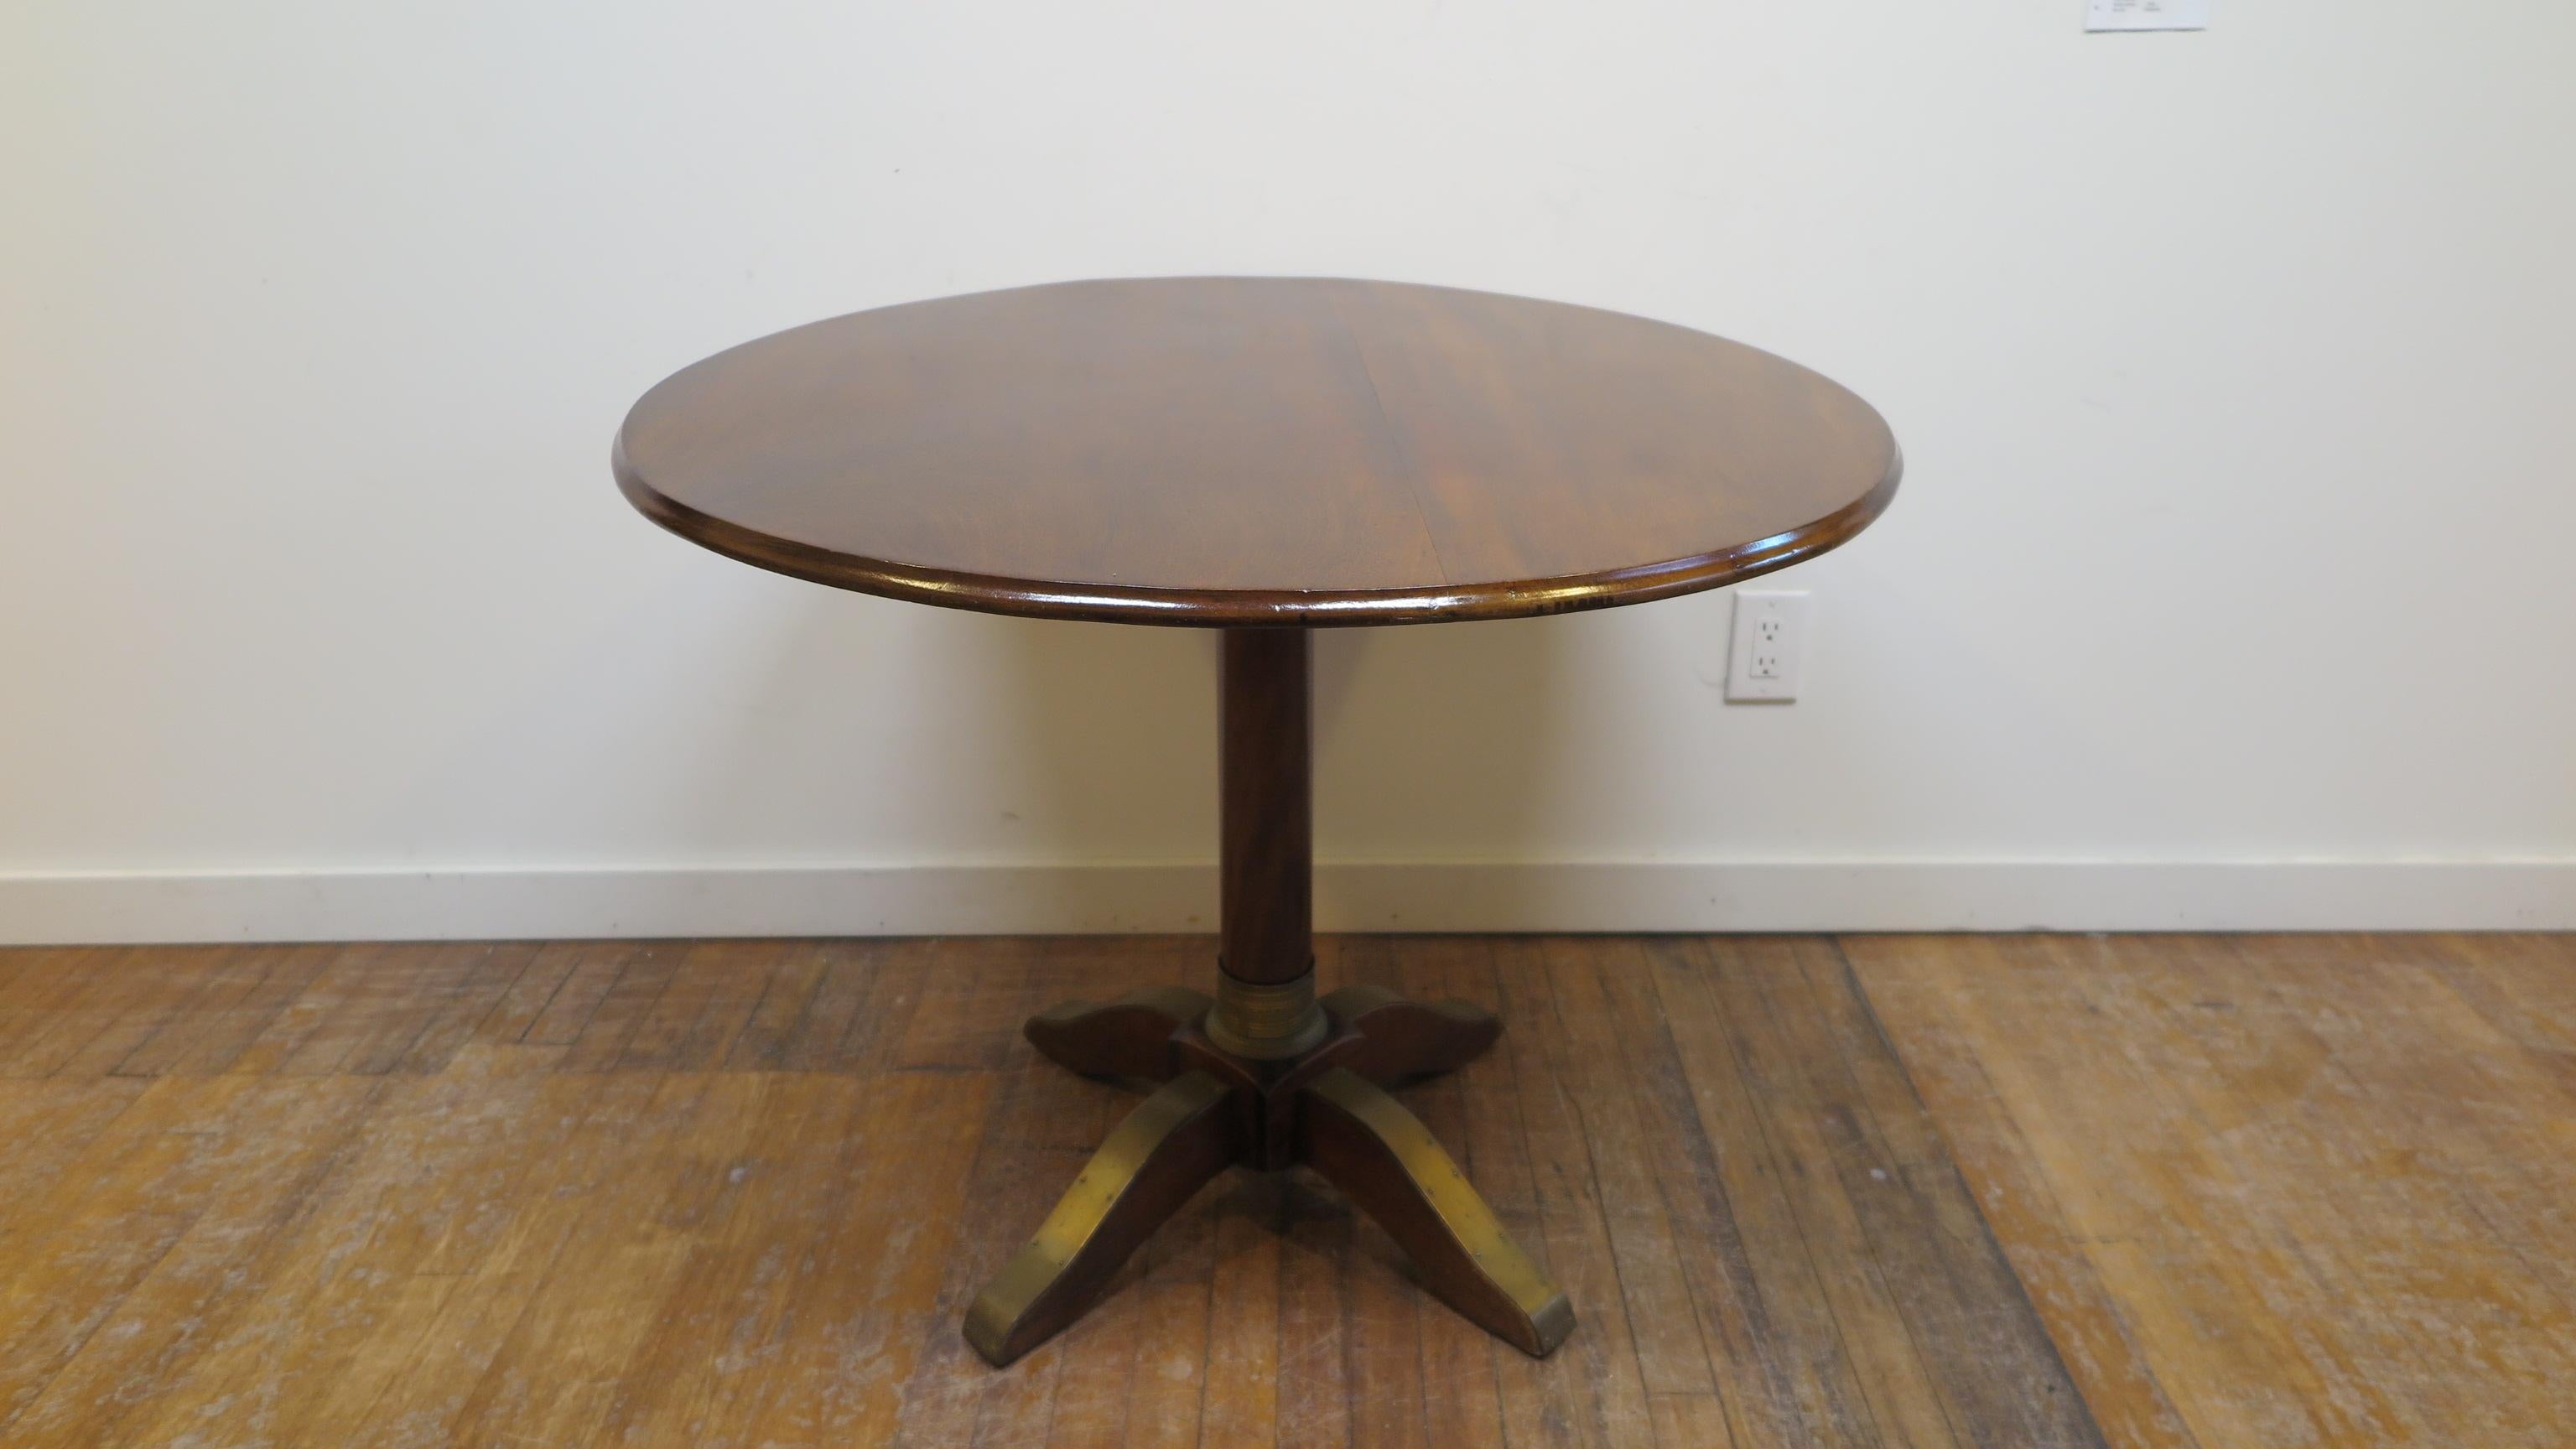 19th century French guéridon hall table. Center hall pedestal table of mahogany with brass details. Solid mahogany wood top, 1870, France. Very good condition.